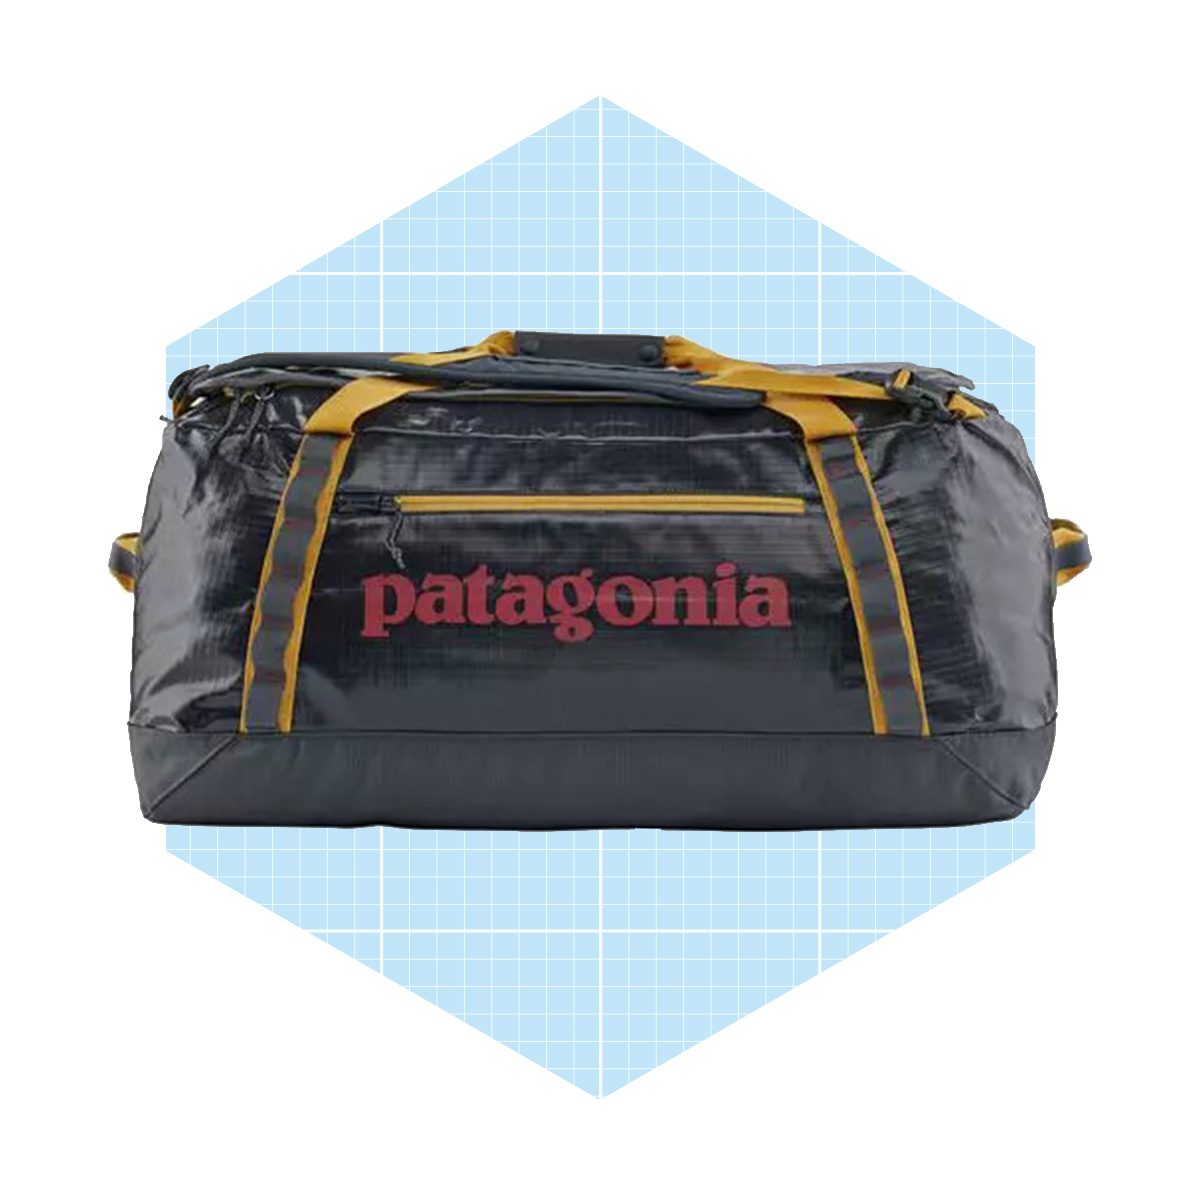 Shop Patagonia Sale Items | Save Up to 40% on Outdoor Gear